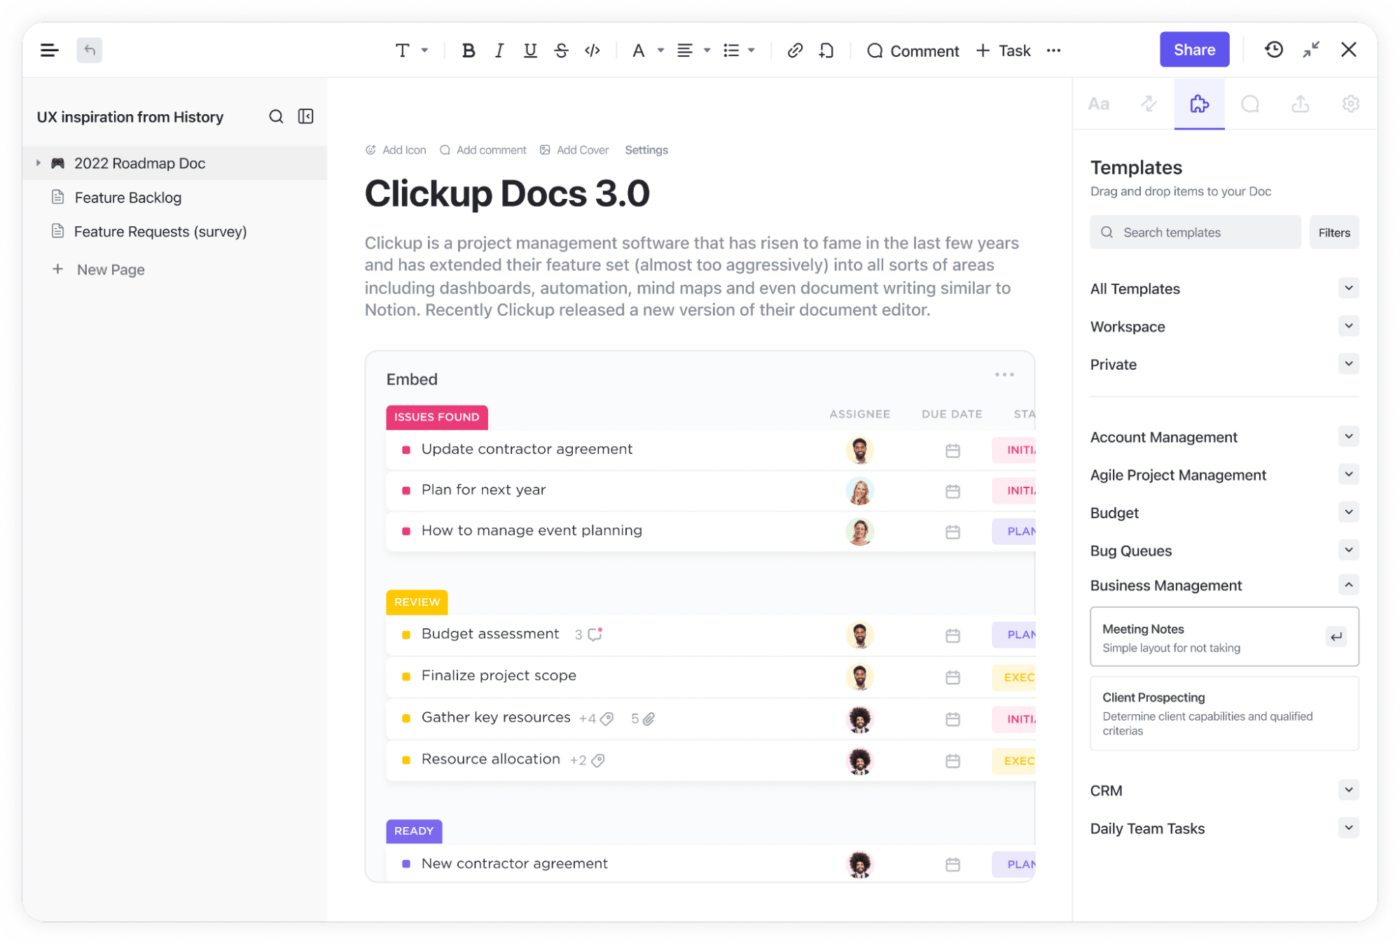 ClickUp best features